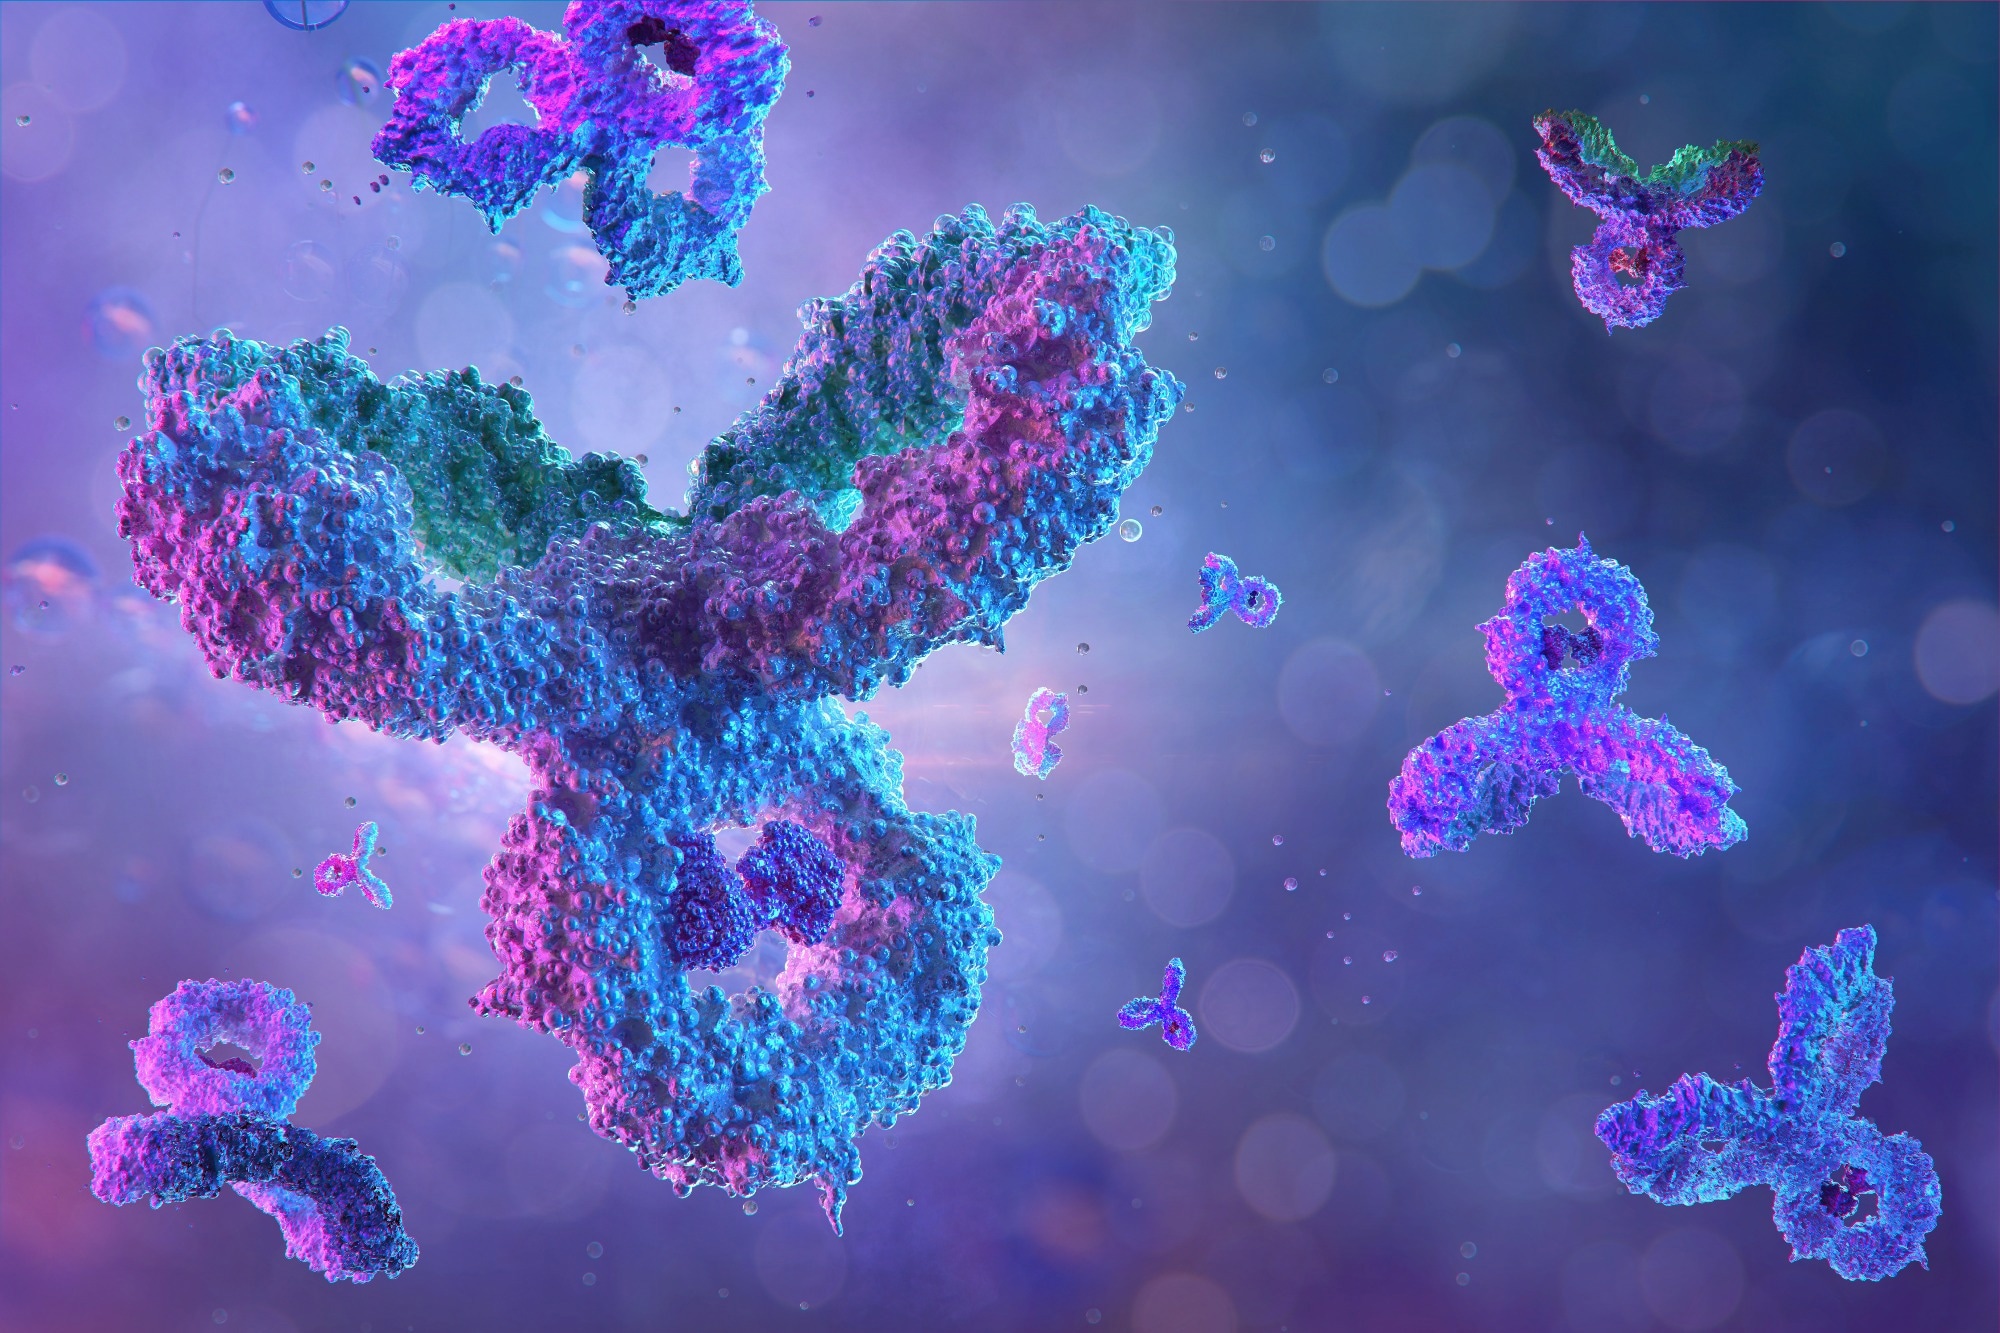 Study: Potent pan huACE2-dependent sarbecovirus neutralizing monoclonal antibodies isolated from a BNT162b2-vaccinated SARS survivor. Image Credit: Corona Borealis Studio/Shutterstock.com